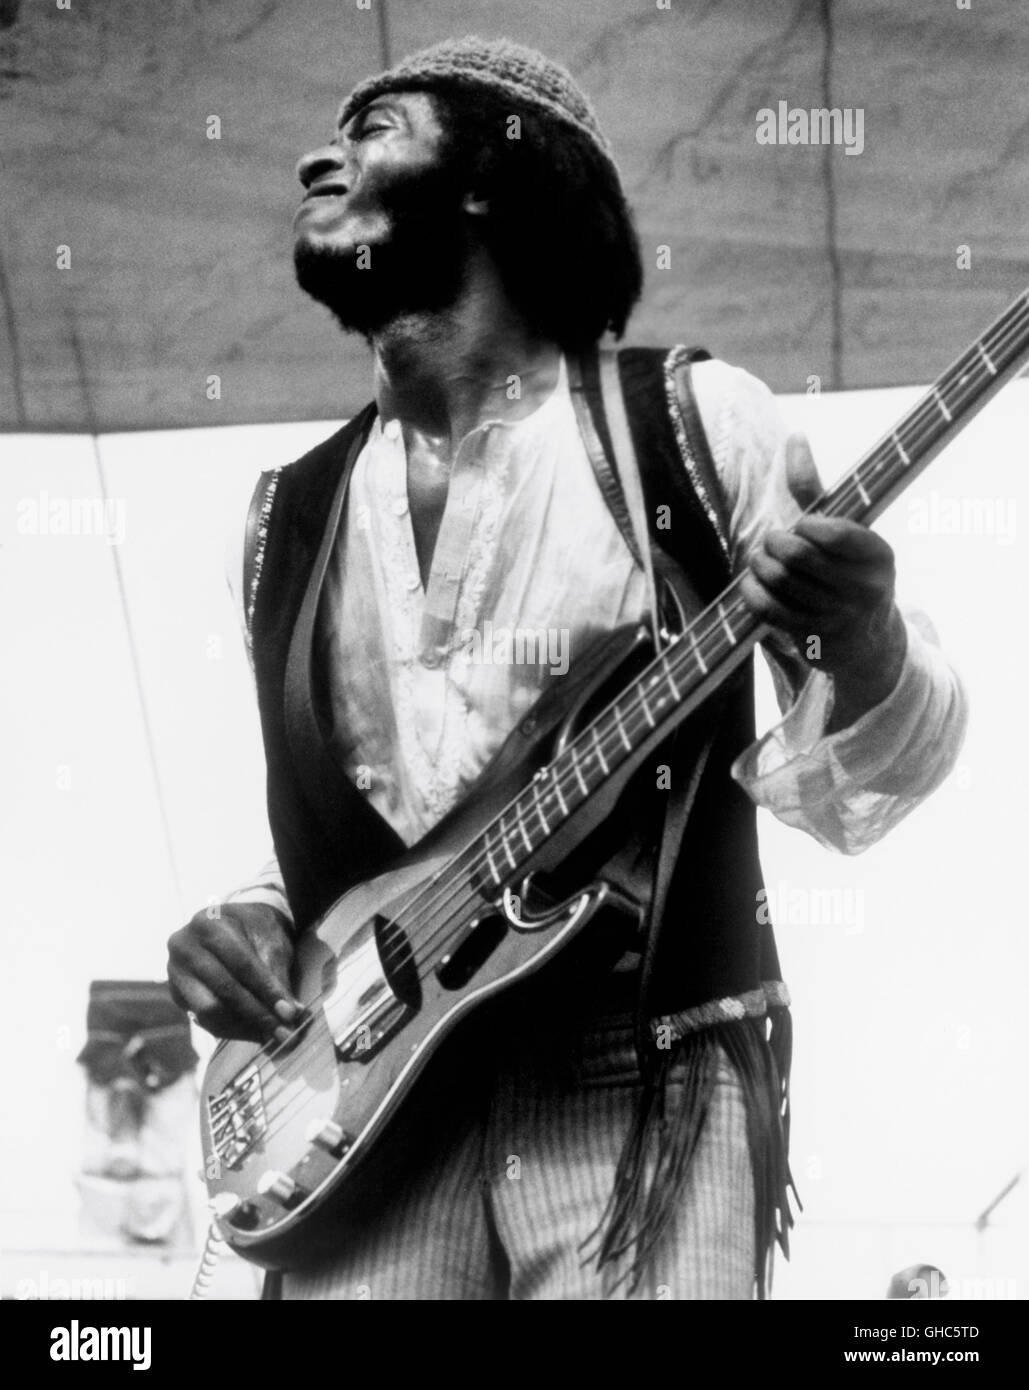 WOODSTOCK USA 1969 Michael Wadleigh Film chronicle of the legendary 1969 three-days-music festival Woodstock image: guitarist FREDDY STONE - Sly and The Family Stone Regie: Michael Wadleigh Stock Photo